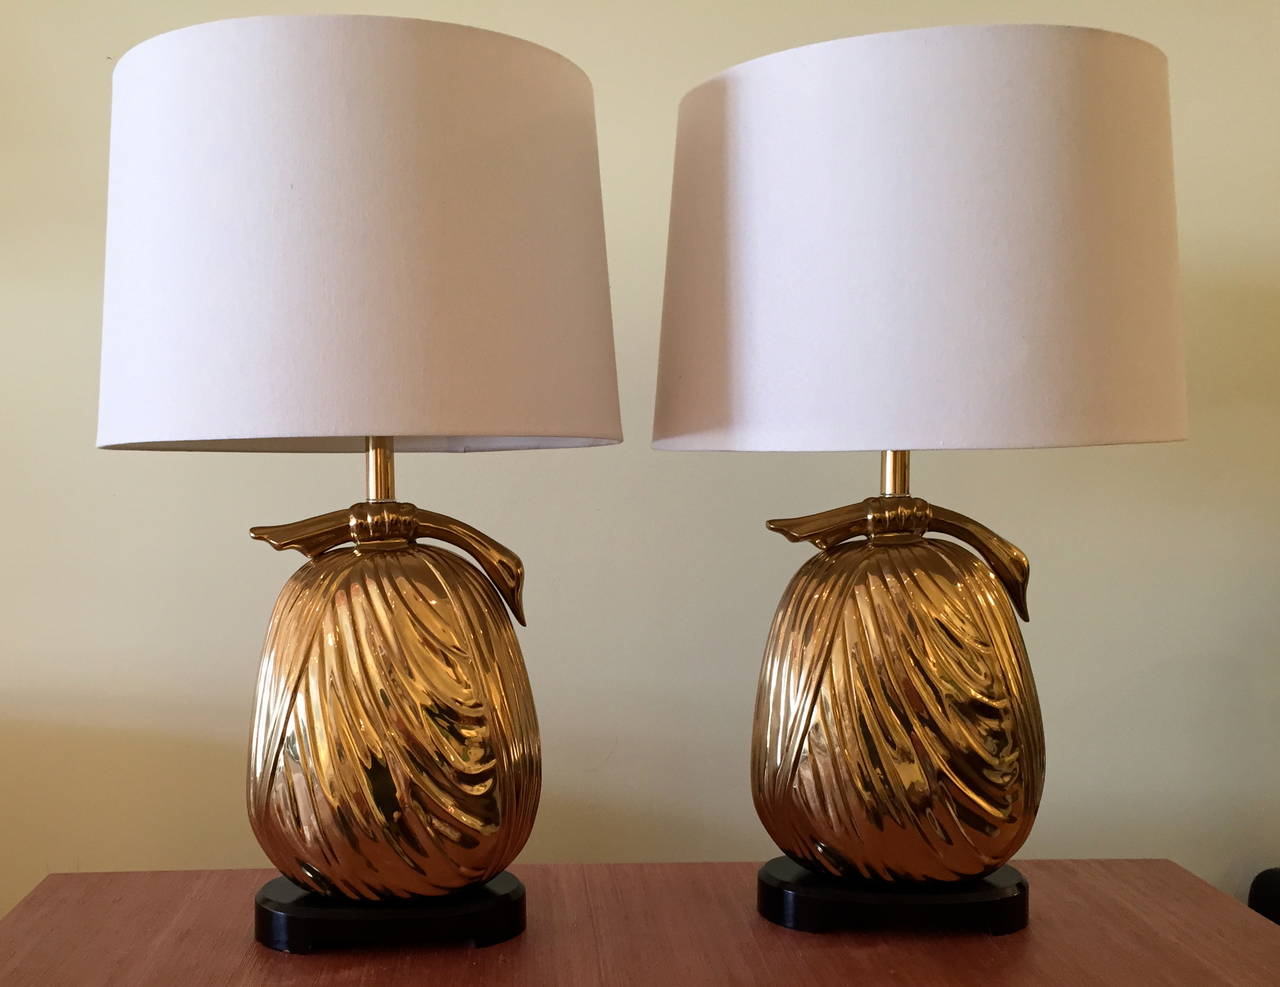 The lamps measure 20 inches to the top of the socket.  The body of the lamps is 15 inches high.  The lampshades are not included in the listing.

Please contact us for shipping options.